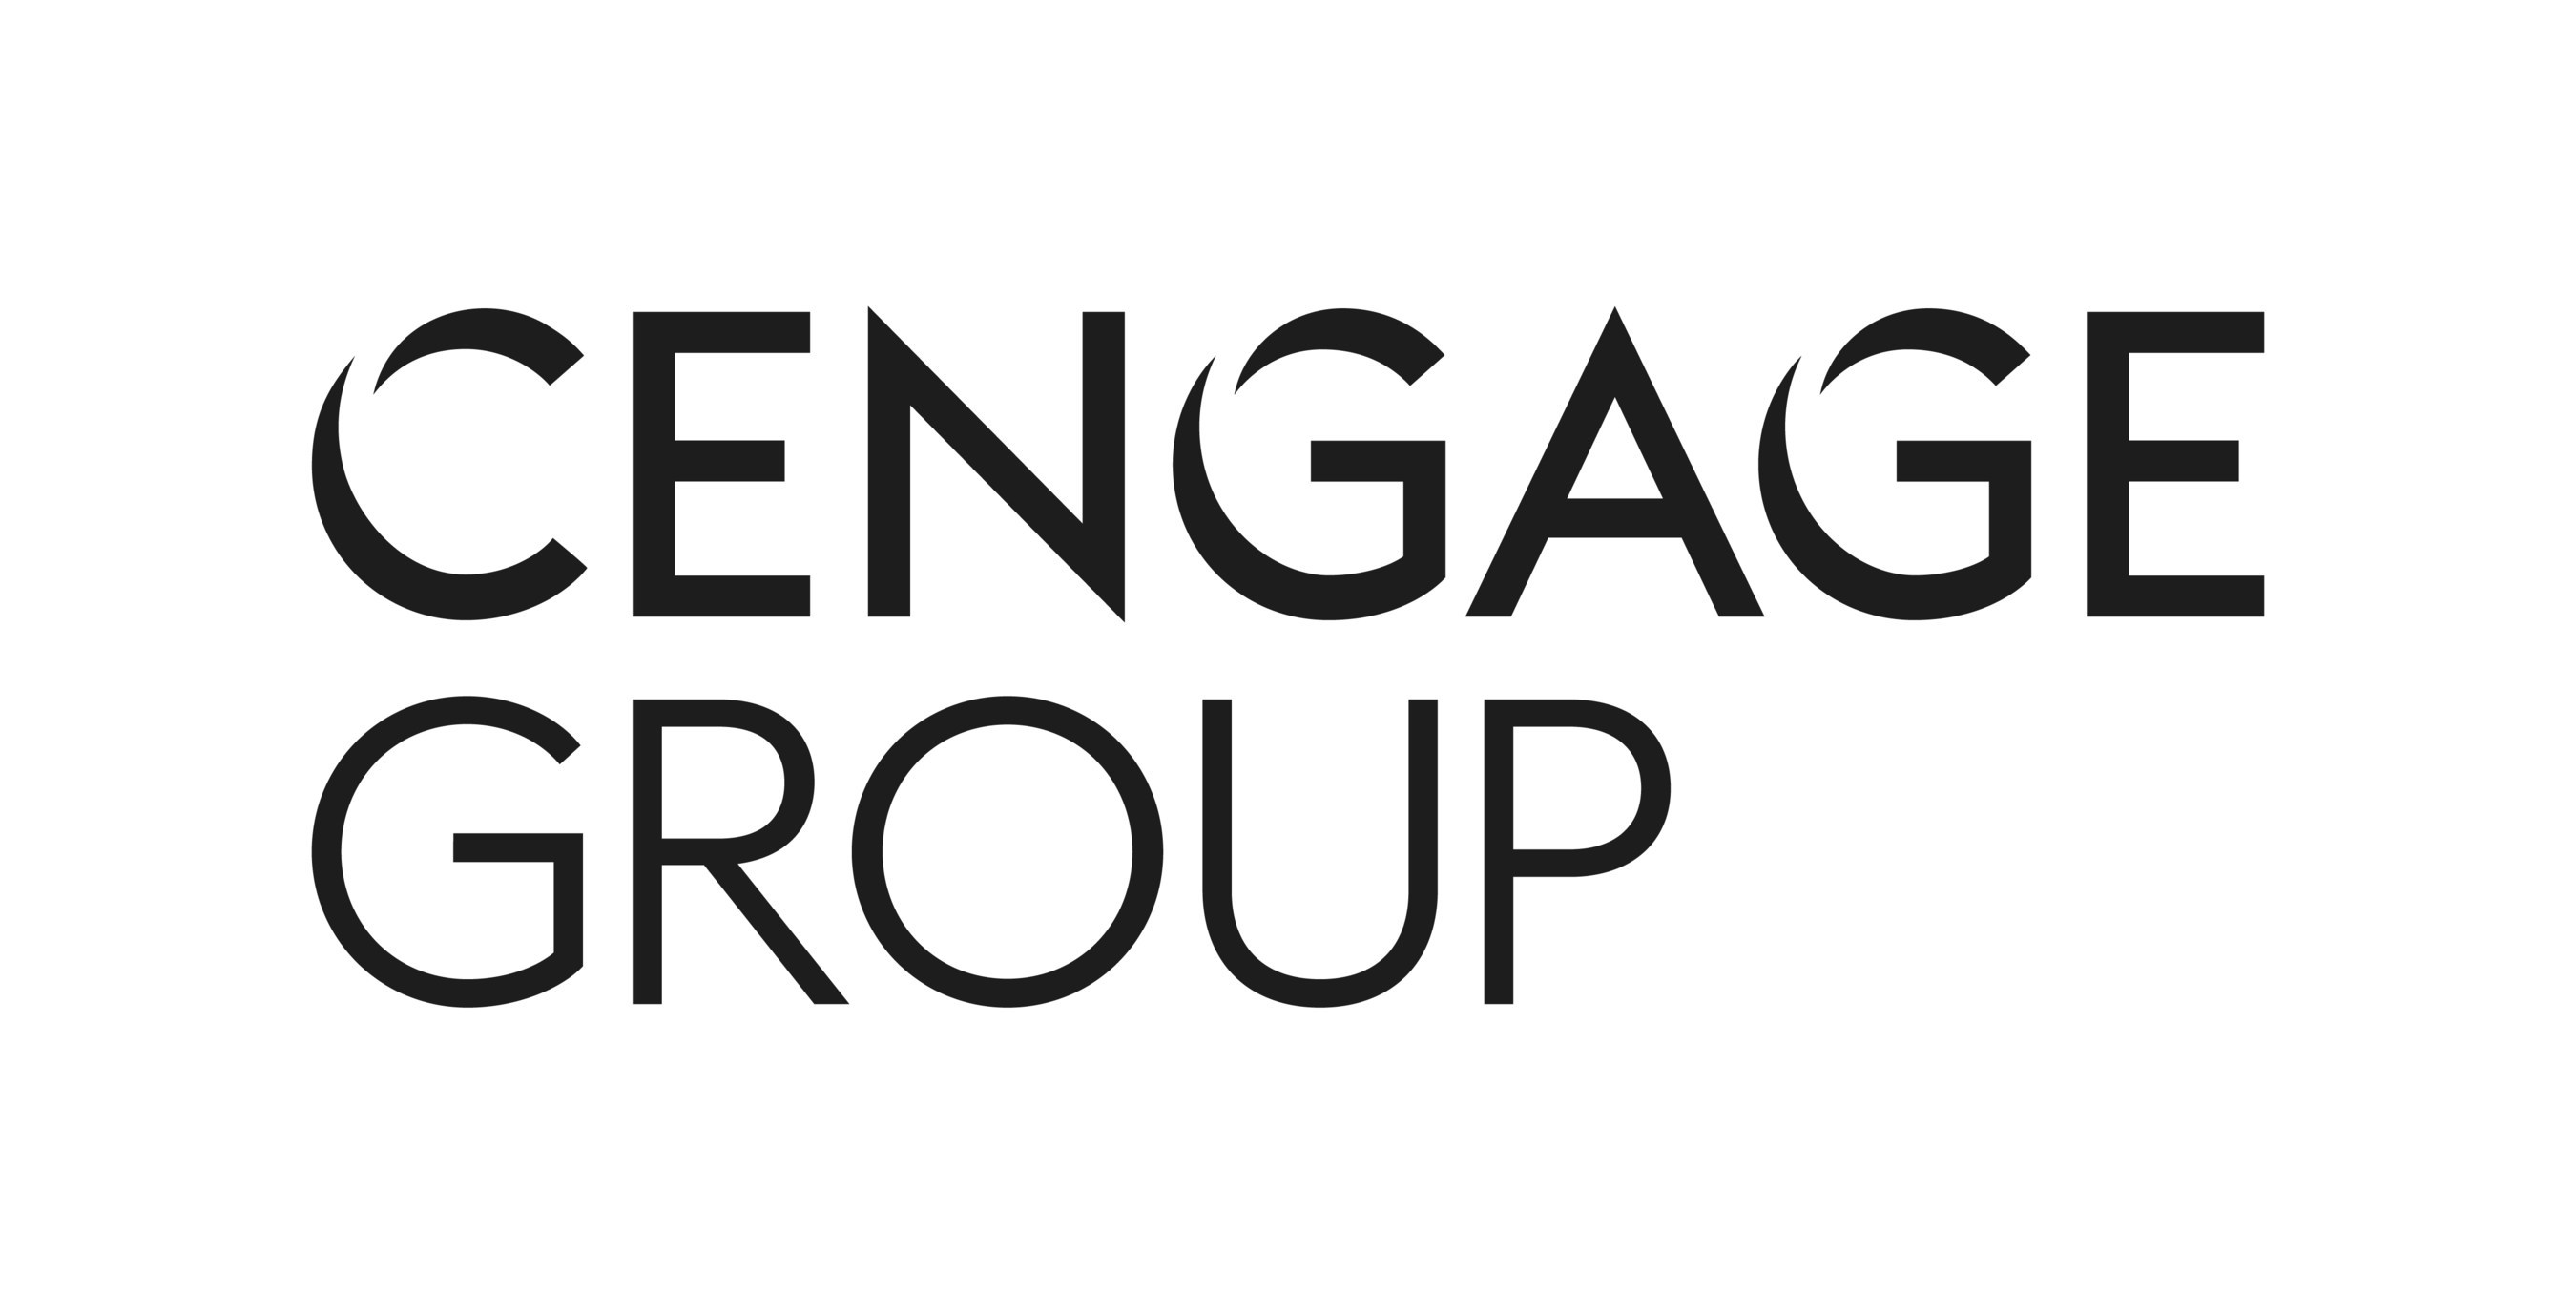 Cengage Group, a global education technology company. (PRNewsfoto/Cengage Group)